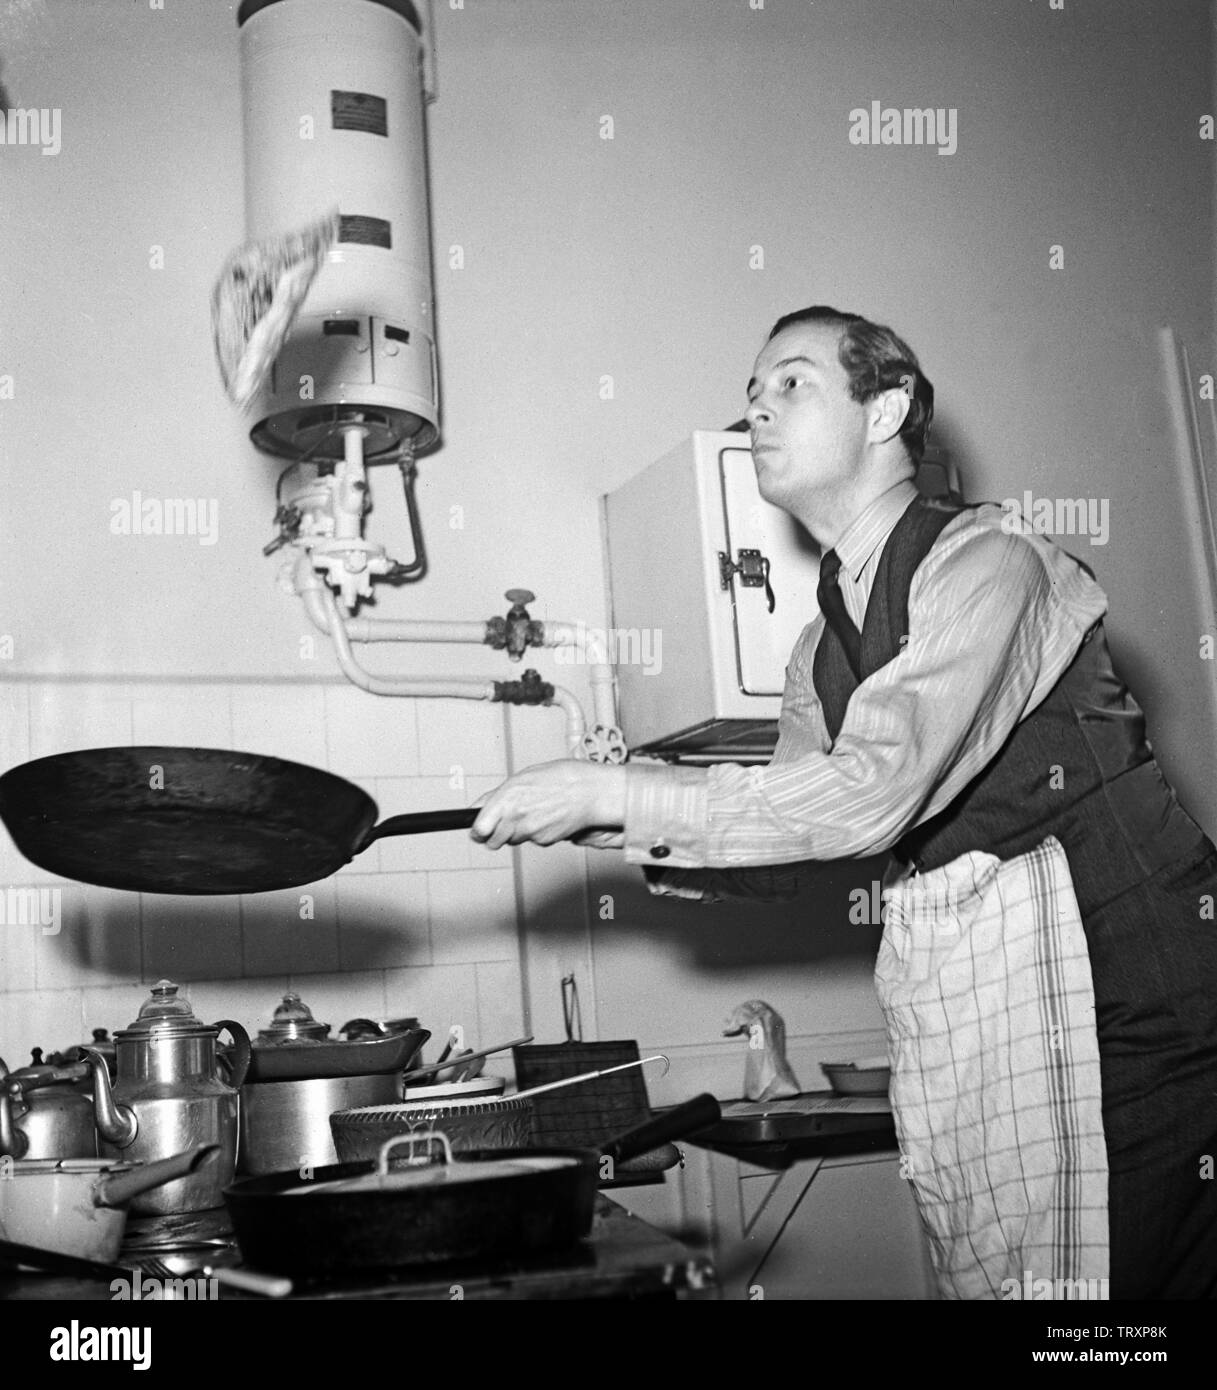 Man of the 1940s. A man is making pancakes and throws it up in the air and hopes it lands again on the other side in the frying pan. Sweden 1945 Kristoffersson Ref R84-1 Stock Photo